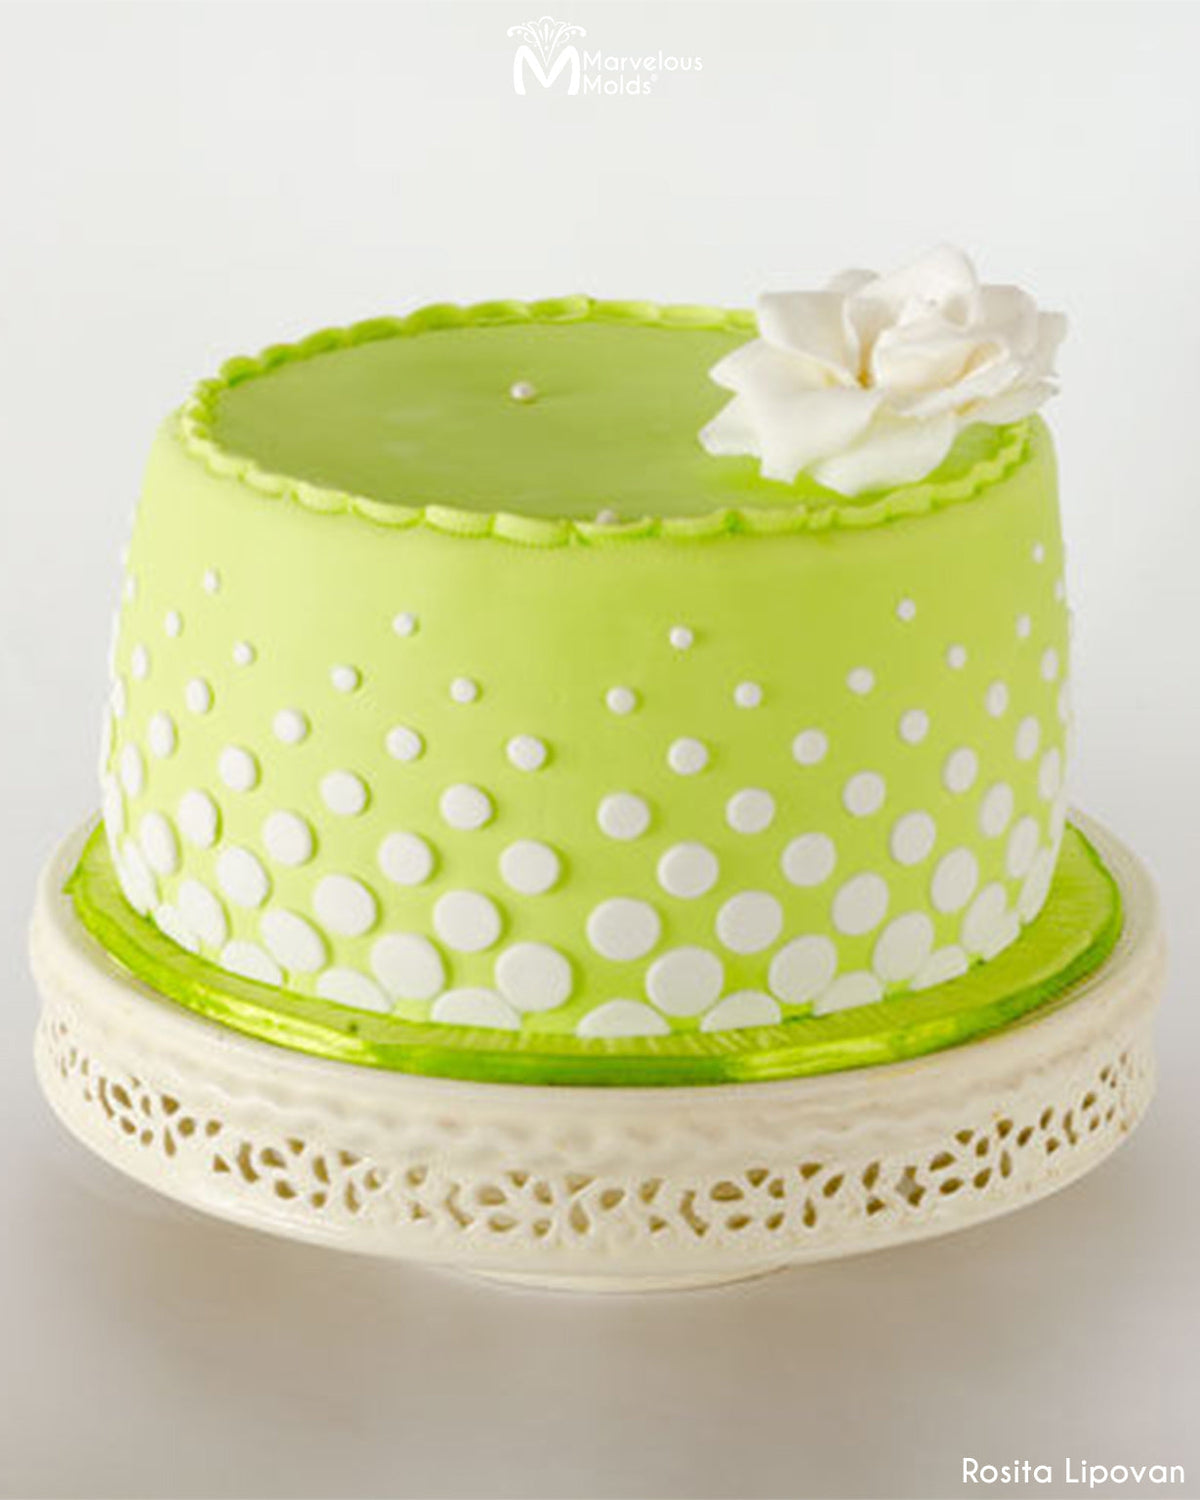 Lime Green Polka Dot Cake Decorated with Sparkling Bubbles Silicone Onlay Cake Stencil Mold by Marvelous Molds